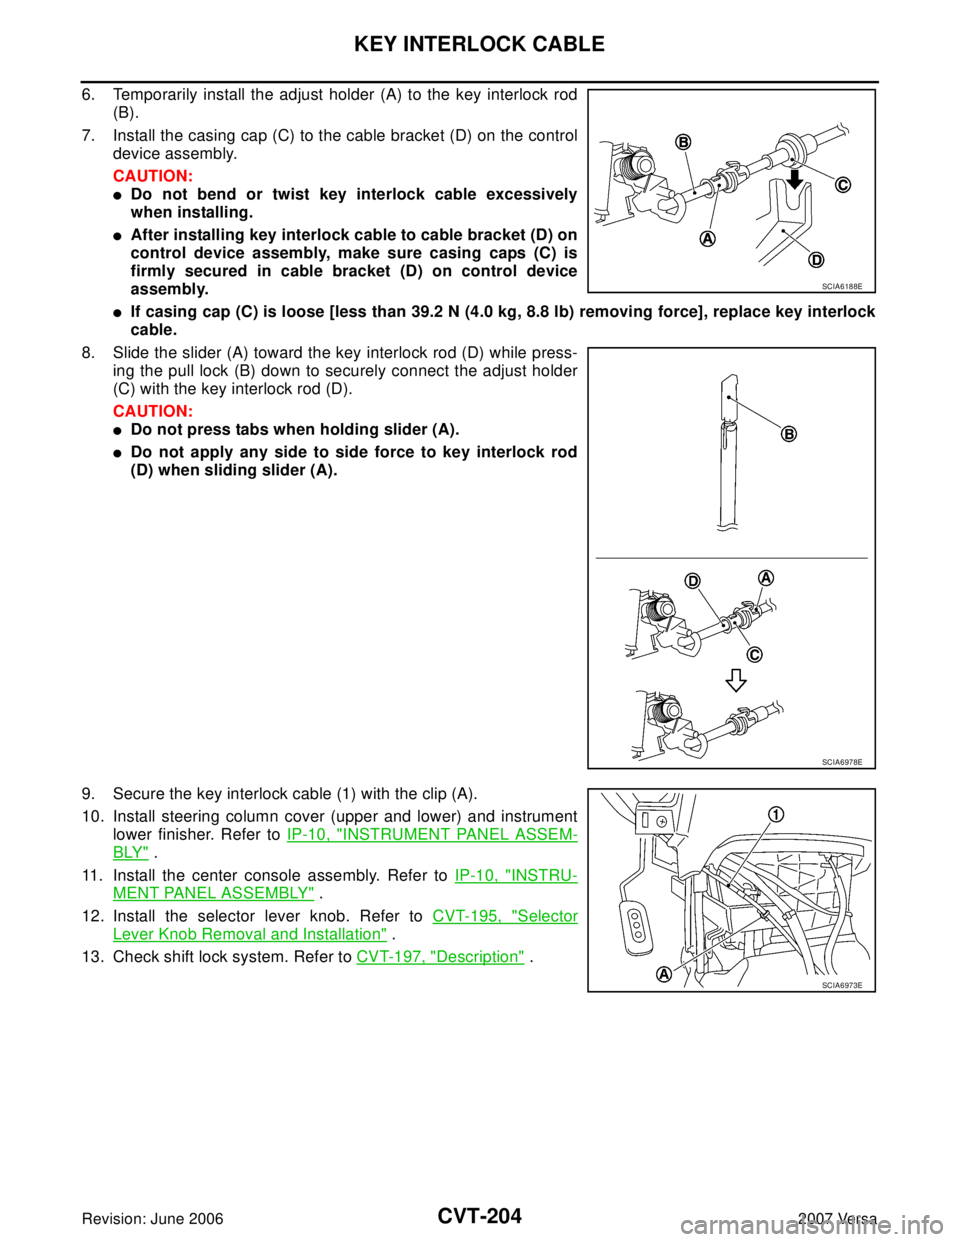 NISSAN TIIDA 2007  Service Repair Manual CVT-204
KEY INTERLOCK CABLE
Revision: June 20062007 Versa
6. Temporarily install the adjust holder (A) to the key interlock rod
(B).
7. Install the casing cap (C) to the cable bracket (D) on the contr